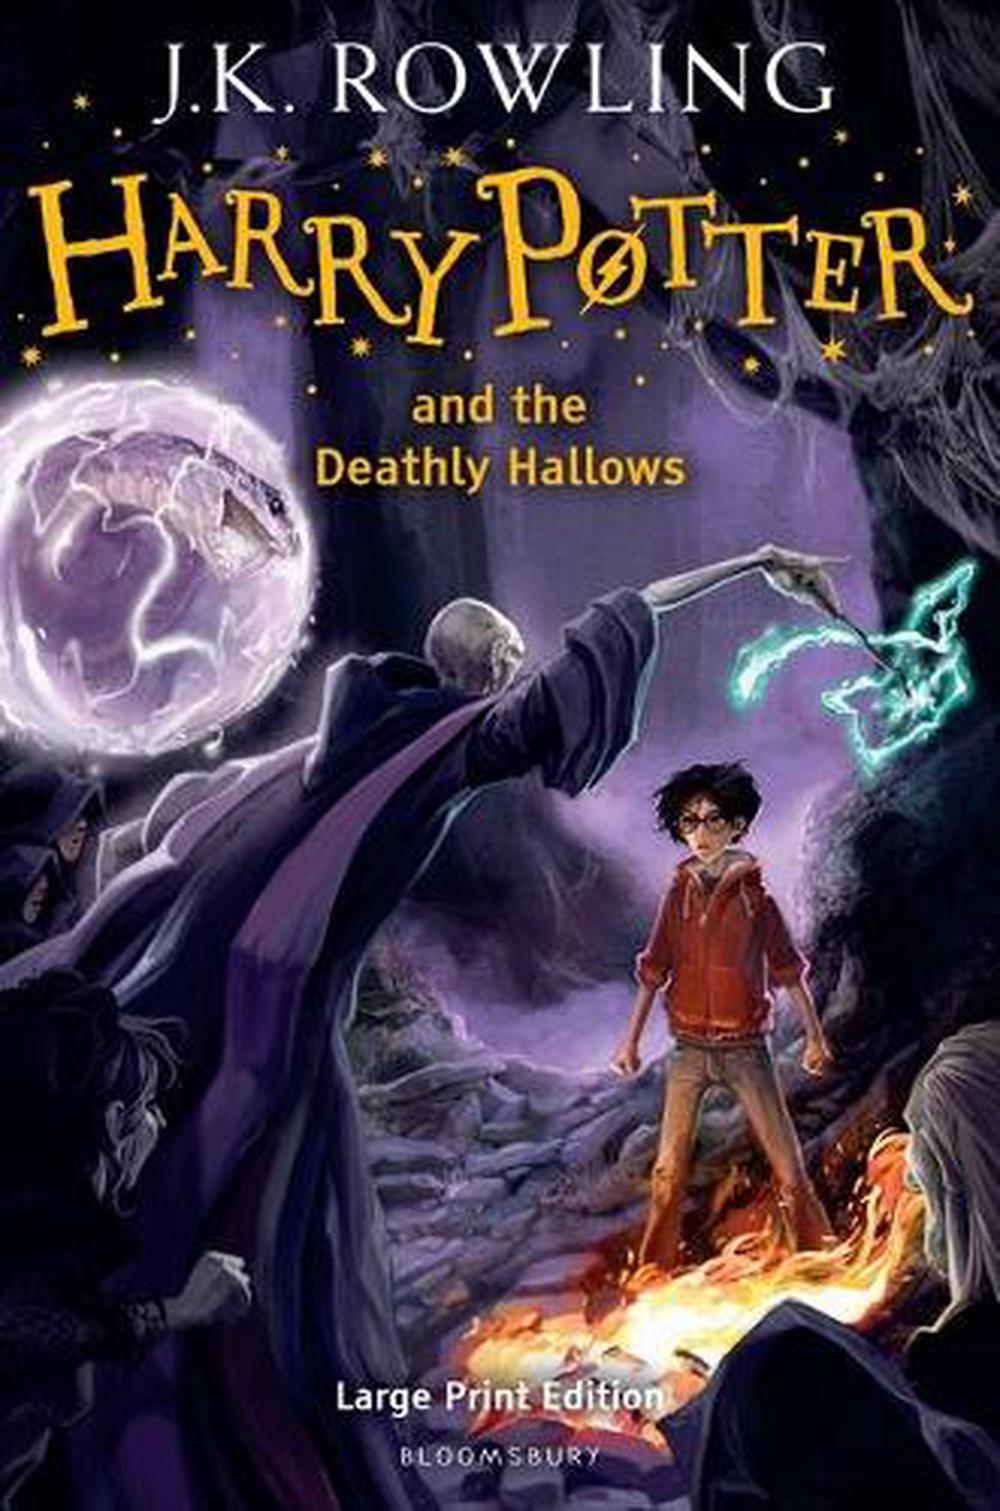 harry potter and the deathly hallows audiobook chapter 1